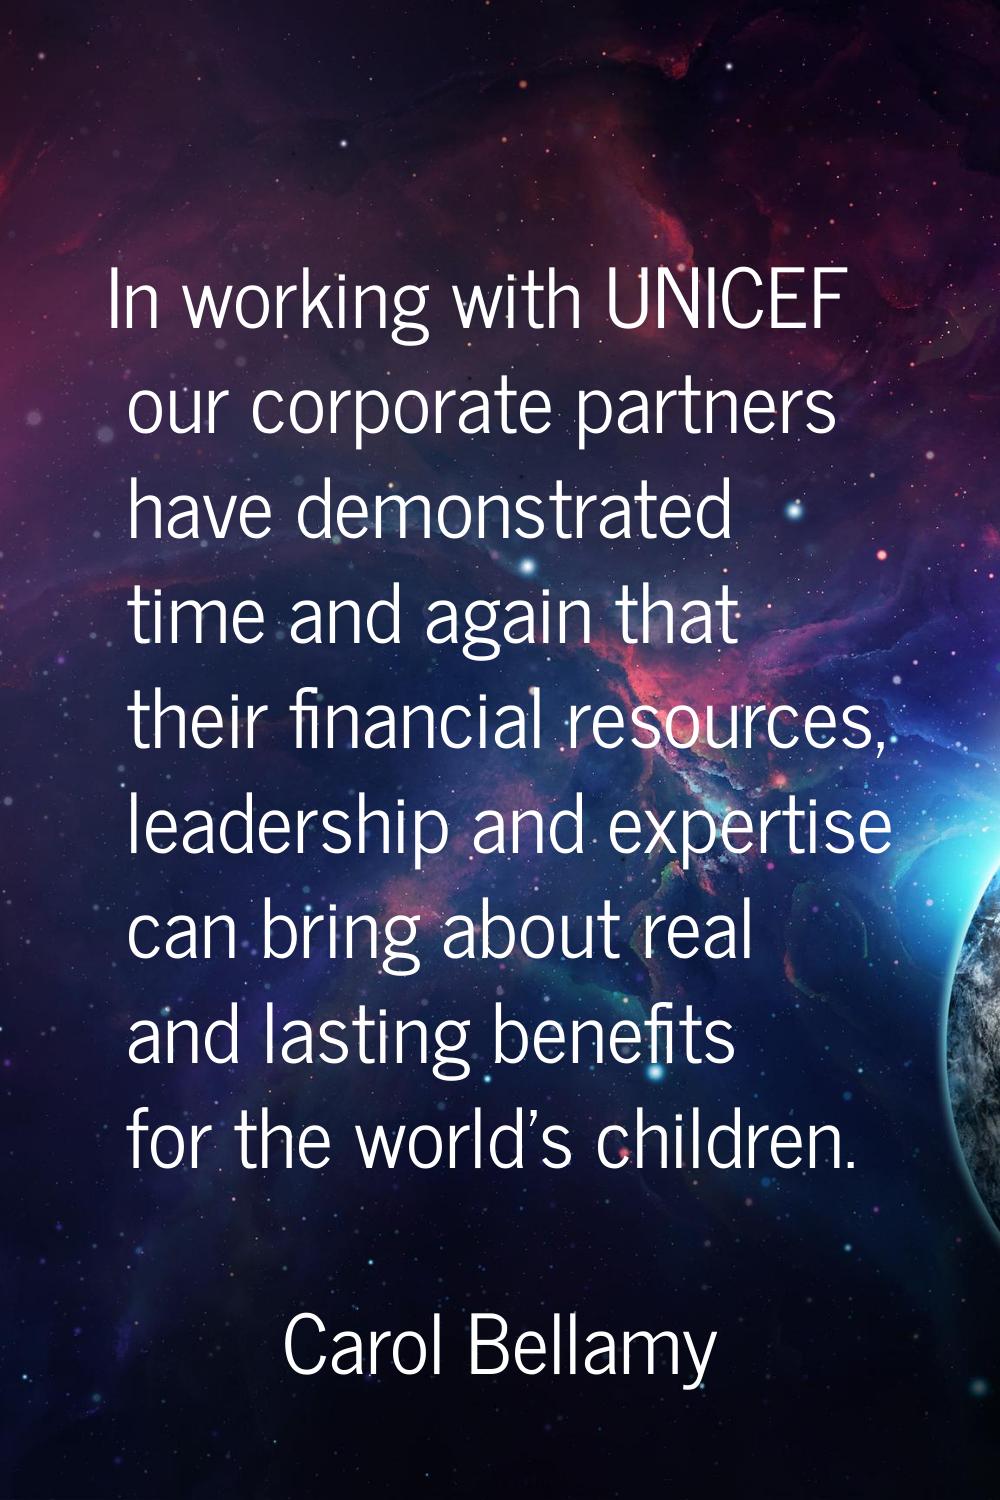 In working with UNICEF our corporate partners have demonstrated time and again that their financial